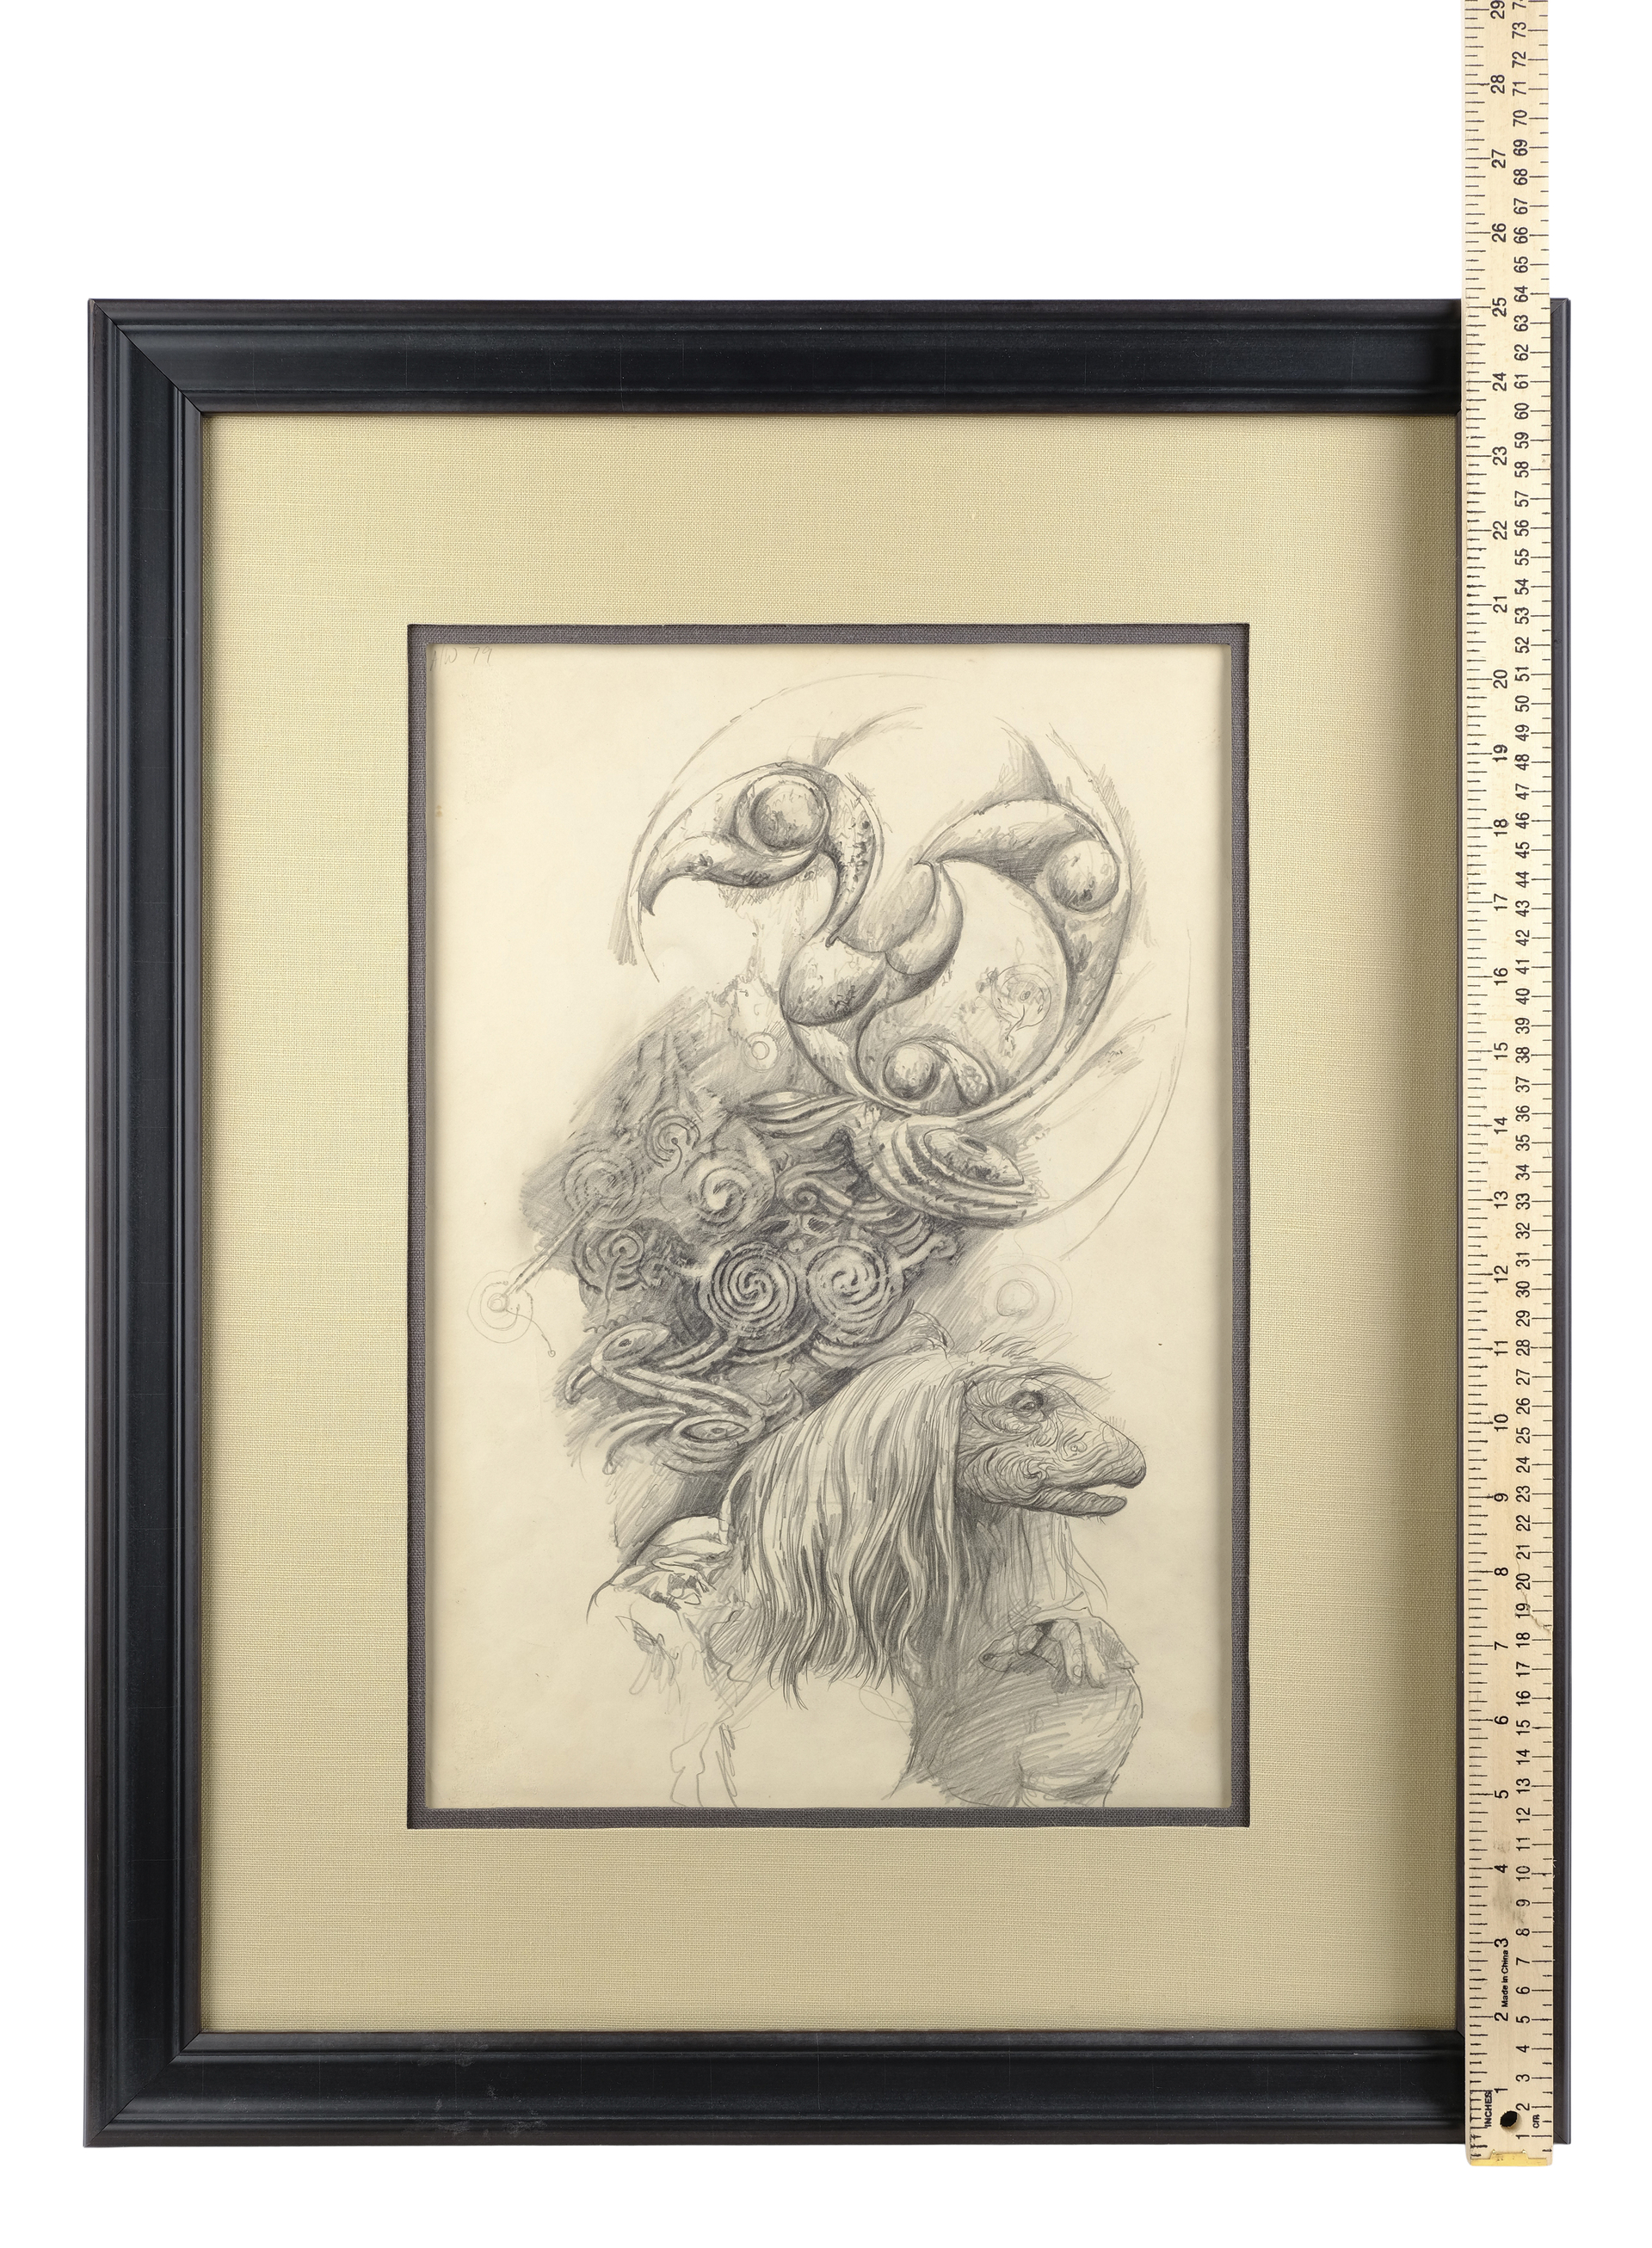 THE DARK CRYSTAL (1982) - Framed Published Hand-Drawn Brian Froud Mystics Concept Artwork - Image 2 of 2